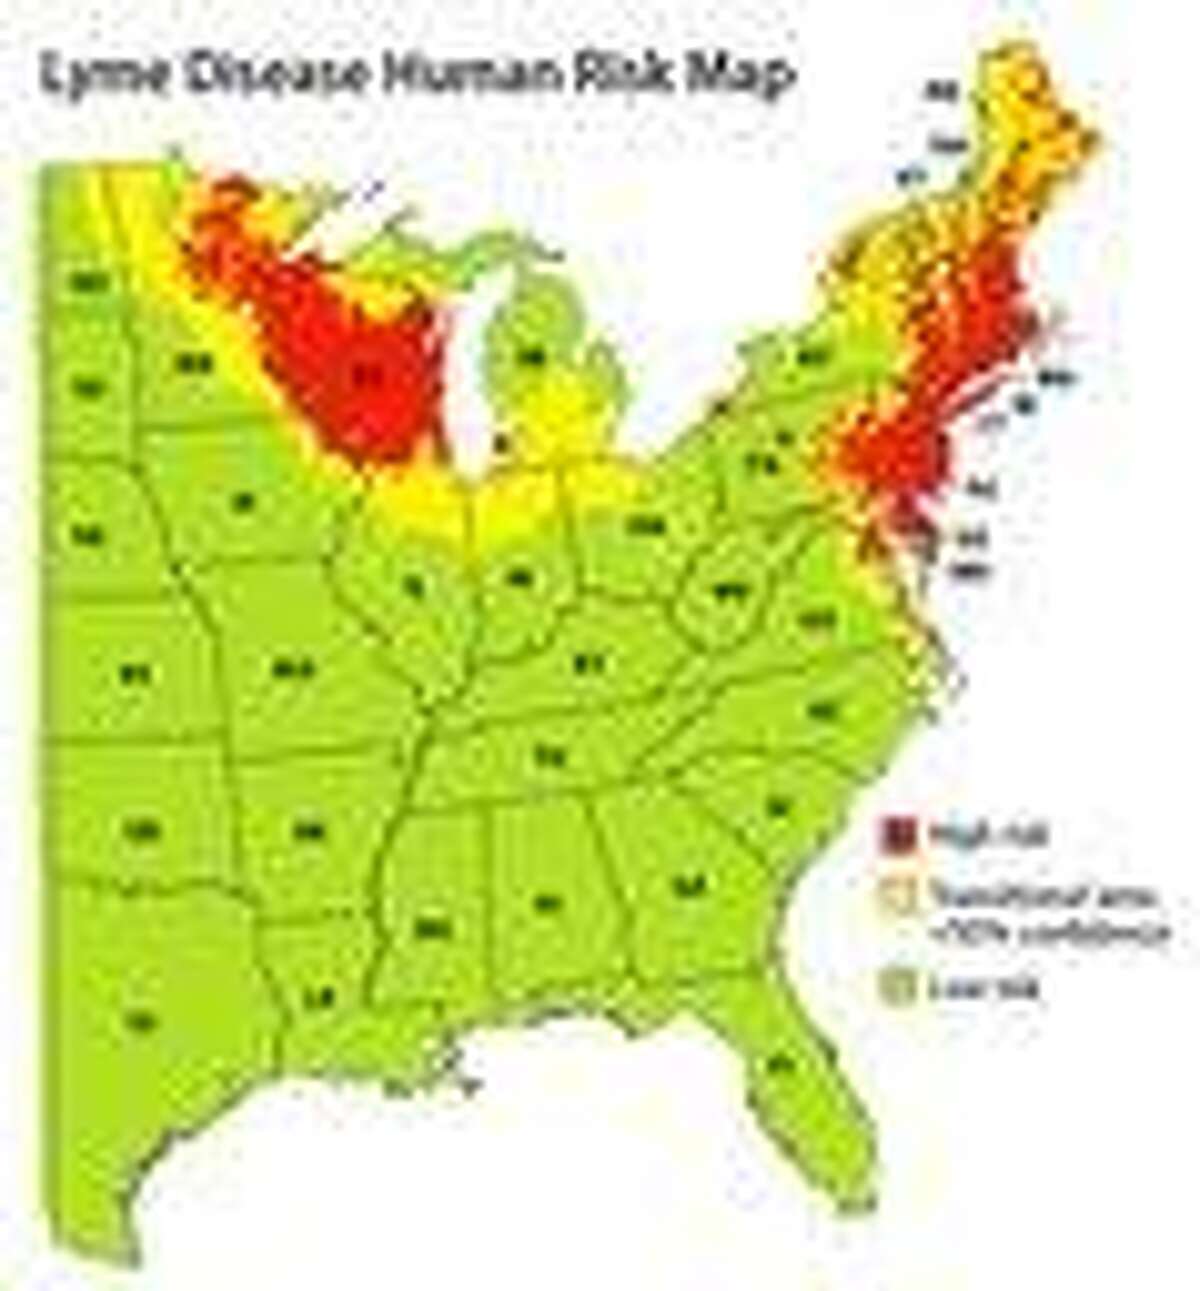 This map, released by the Yale School of Public Health on Friday, shows a map which indicates areas of the eastern United States where people have the highest risk of contracting Lyme disease, based on data from 2004-2007. Researchers dragged sheets of fabric through the woods to snag ticks for the survey. The map shows a clear risk across much of the Northeast, from Maine to northern Virginia. Researchers at Yale University also identified a high-risk region across most of Wisconsin, northern Minnesota and a sliver of northern Illinois. Areas highlighted as "emerging risk" regions include the Illinois-Indiana border, the New York-Vermont border, southwestern Michigan and eastern North Dakota. Associated Press